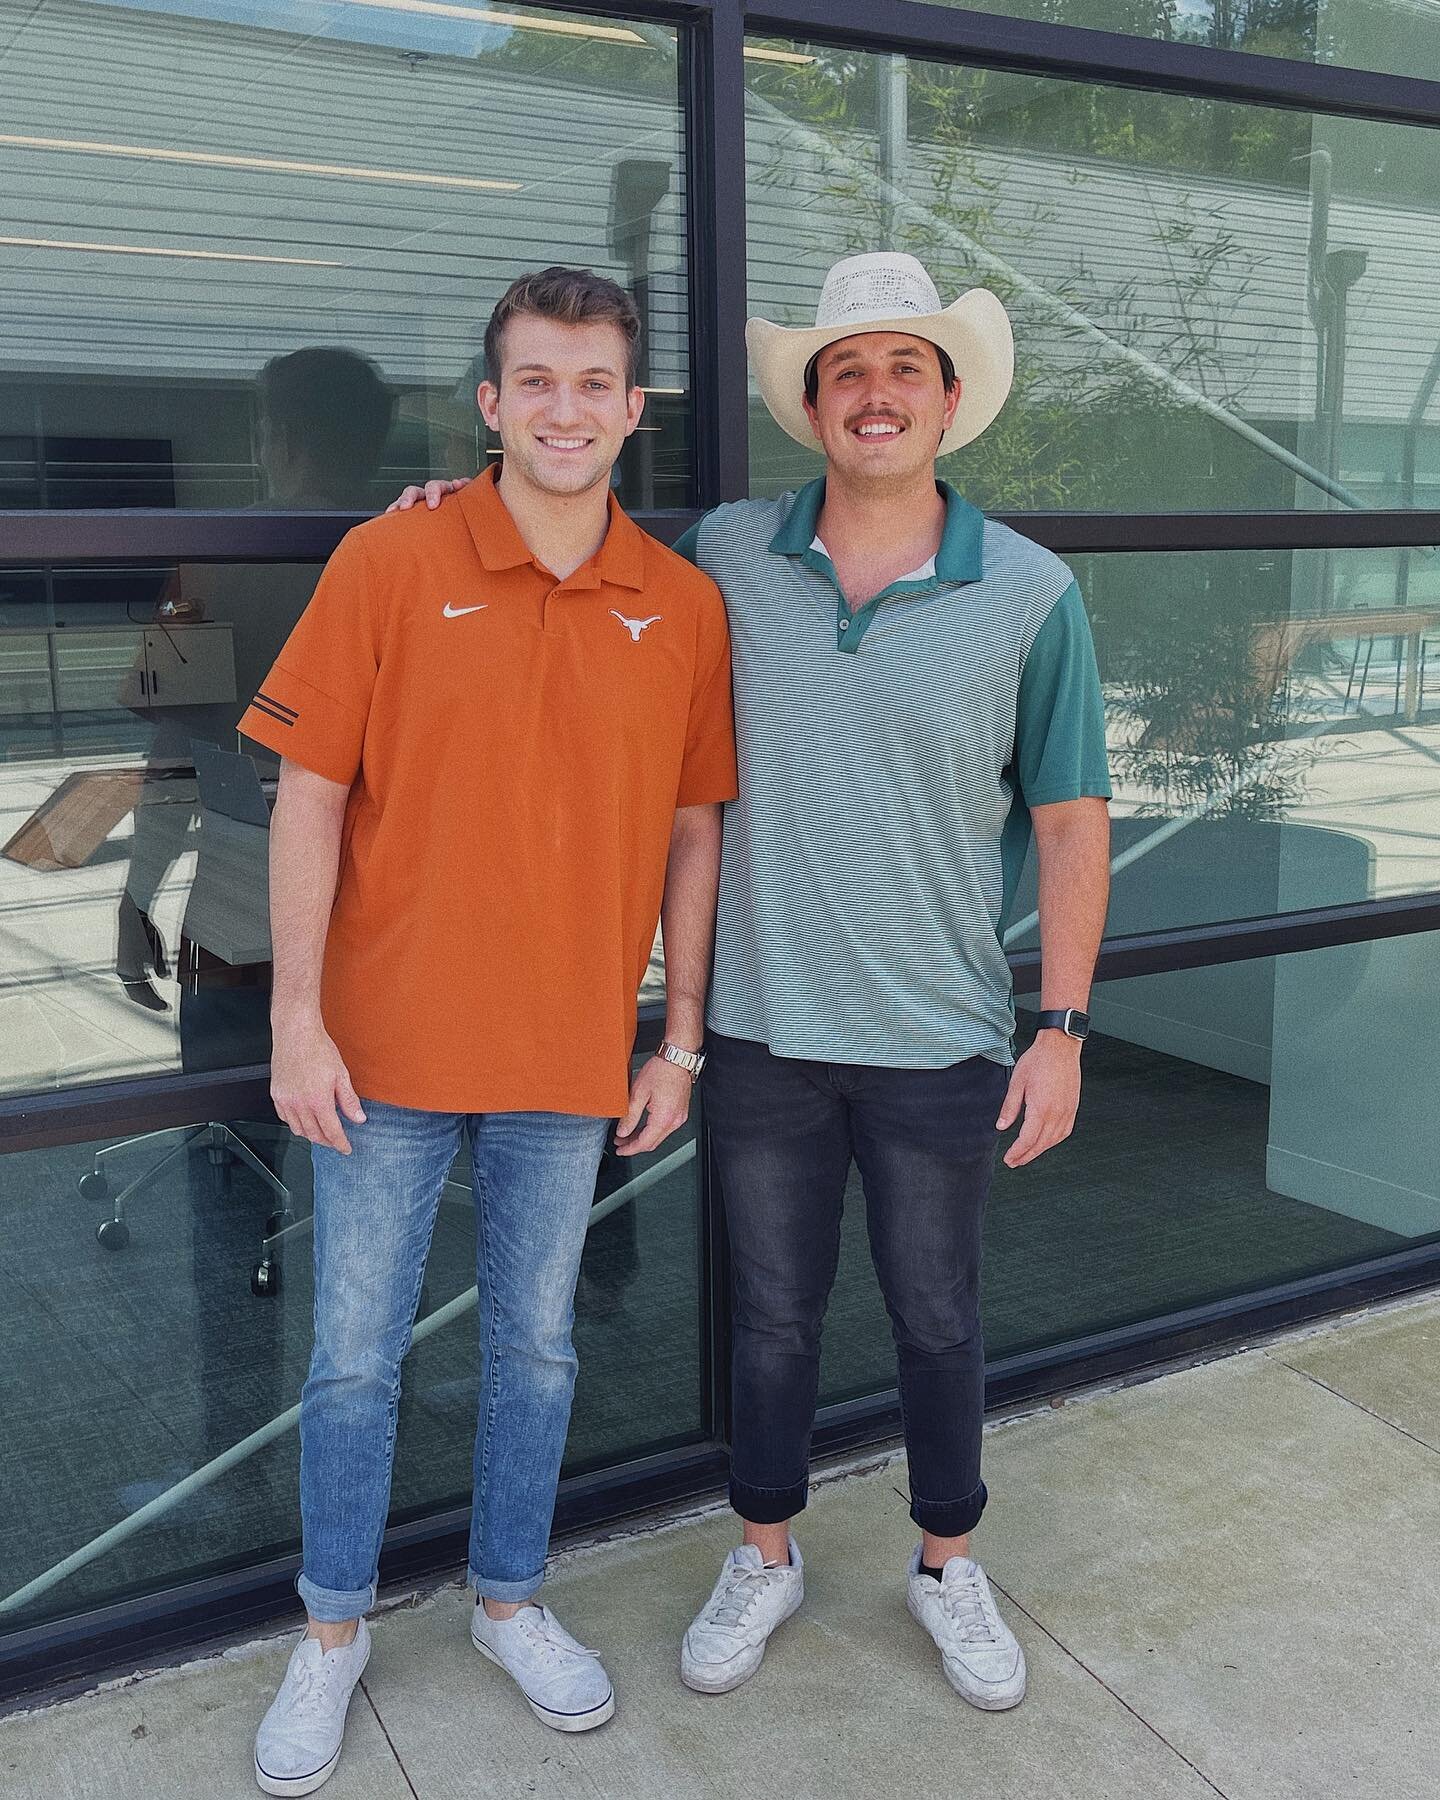 Love having part of the Austin team in the Atlanta office this week!! Thanks for making the trip @micklint and @joey_valdez! 🤠🤠